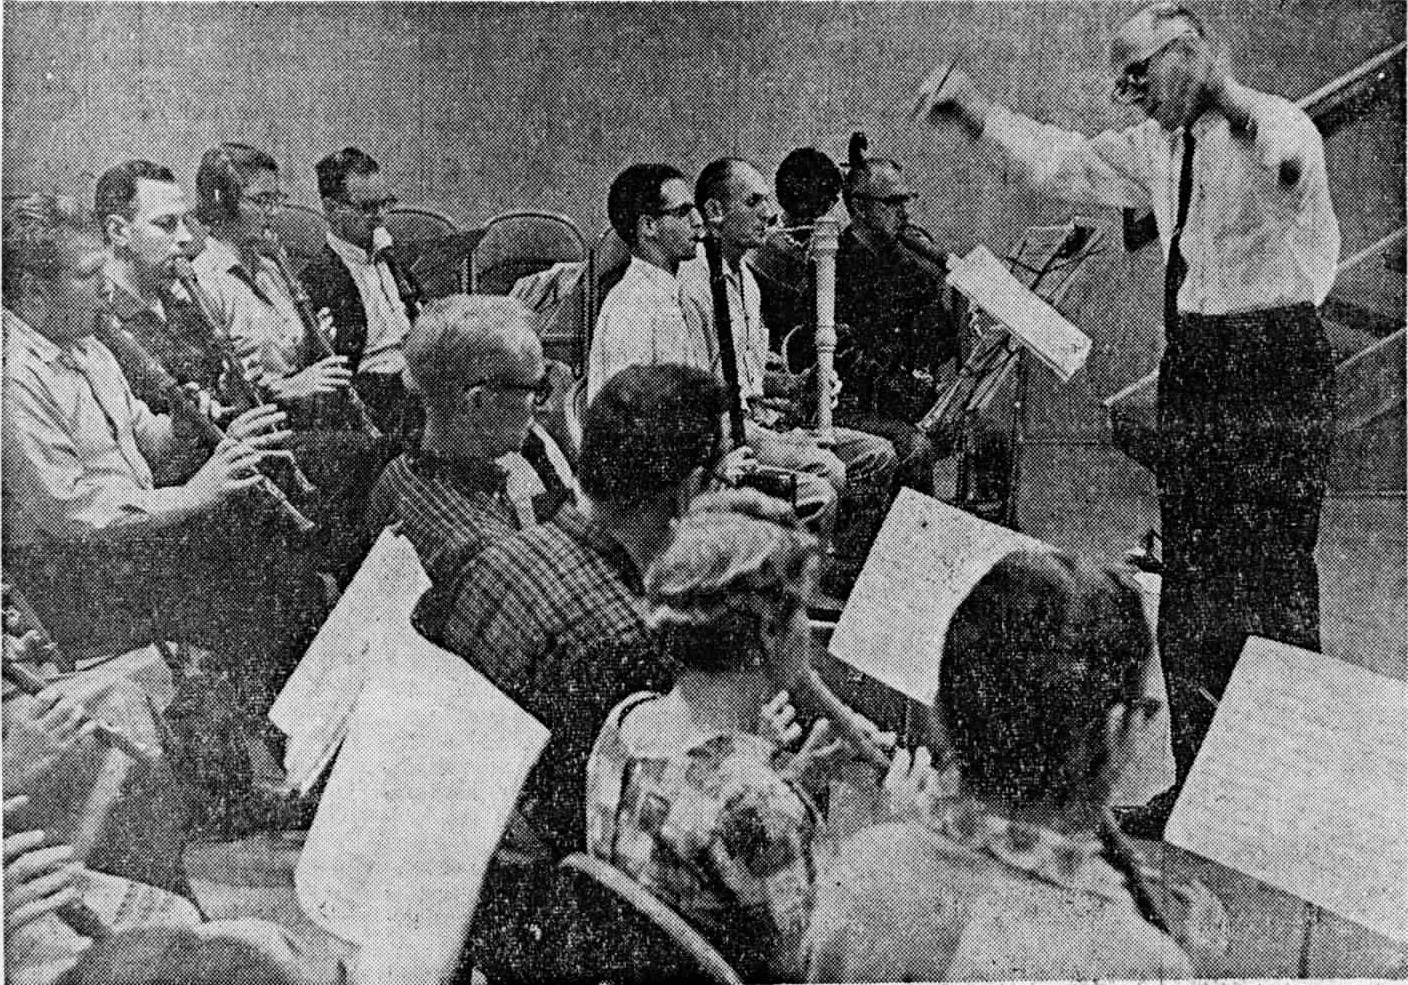 Barnhart conducts MPRO in 1962